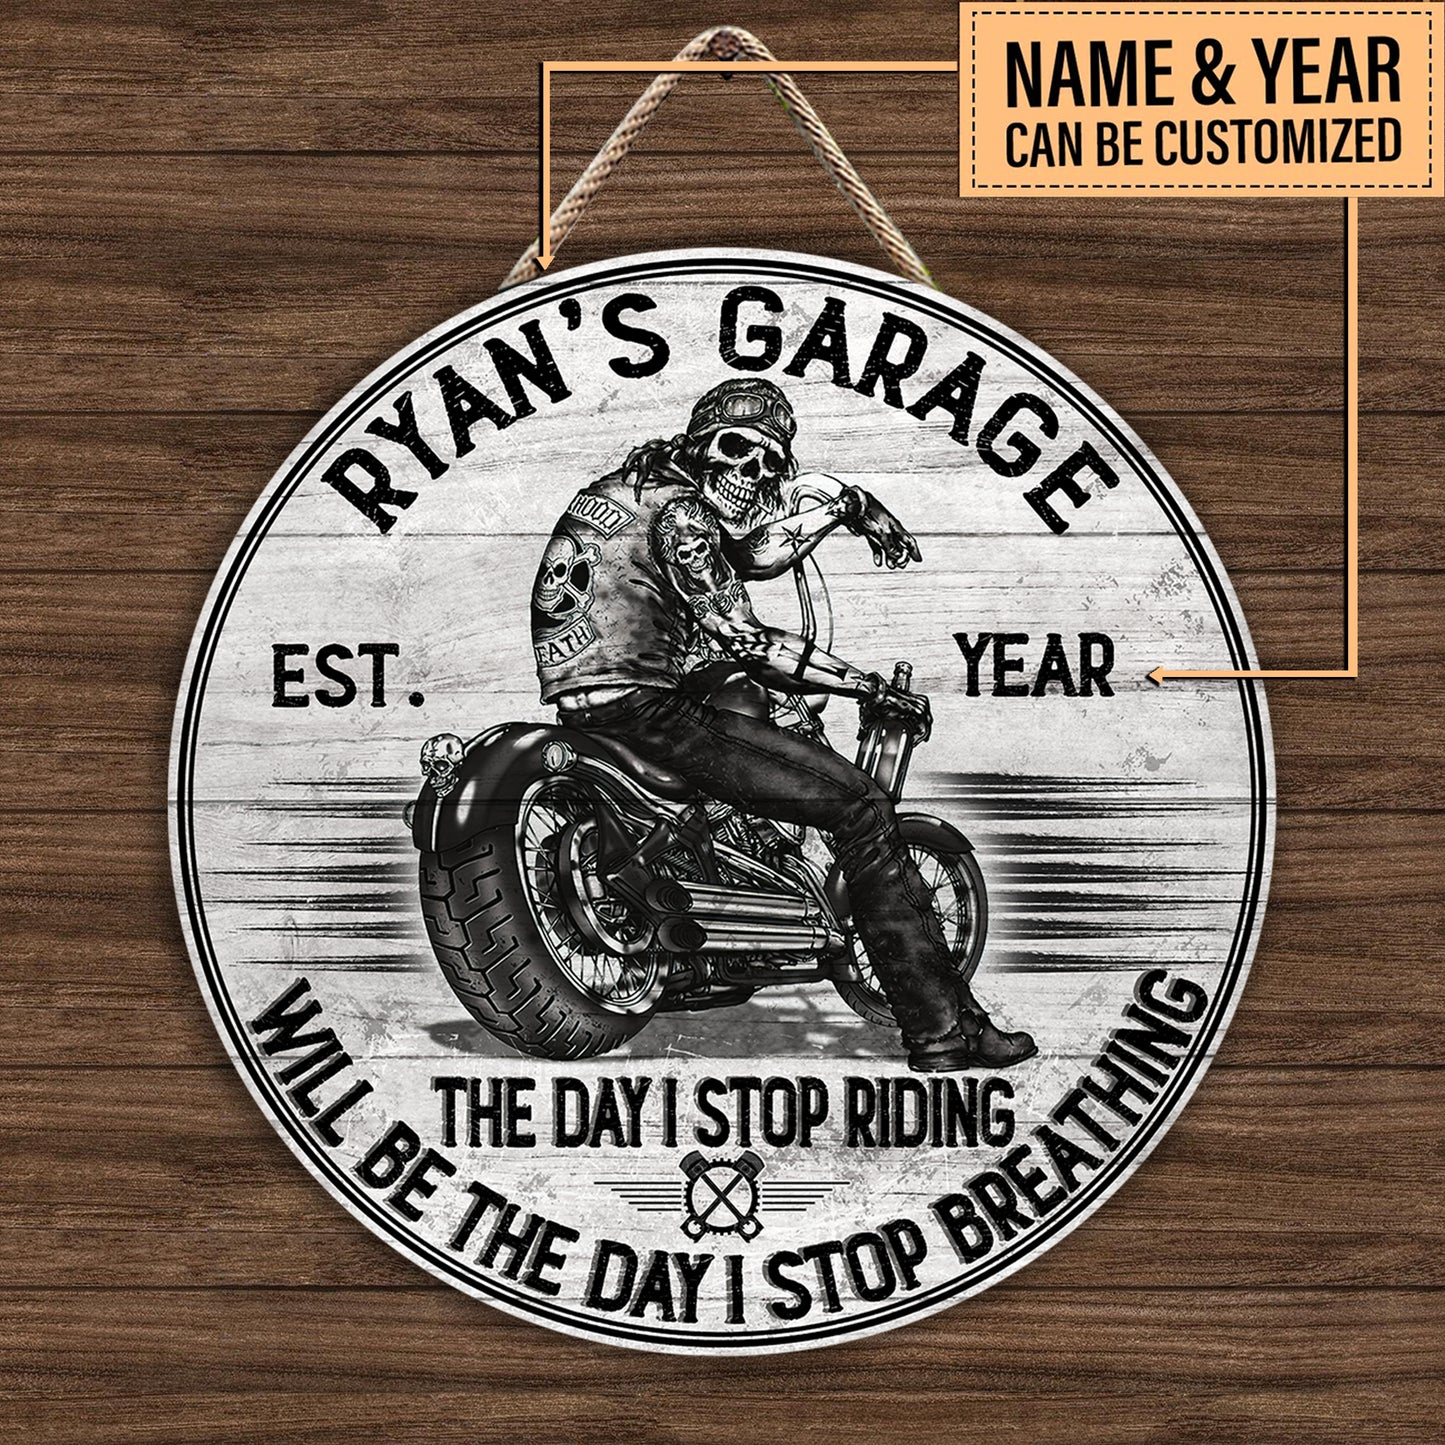 Personalized The Day I Stop Riding Will Be The Day I Stop Breathing Motorcycles Wood Round Sign